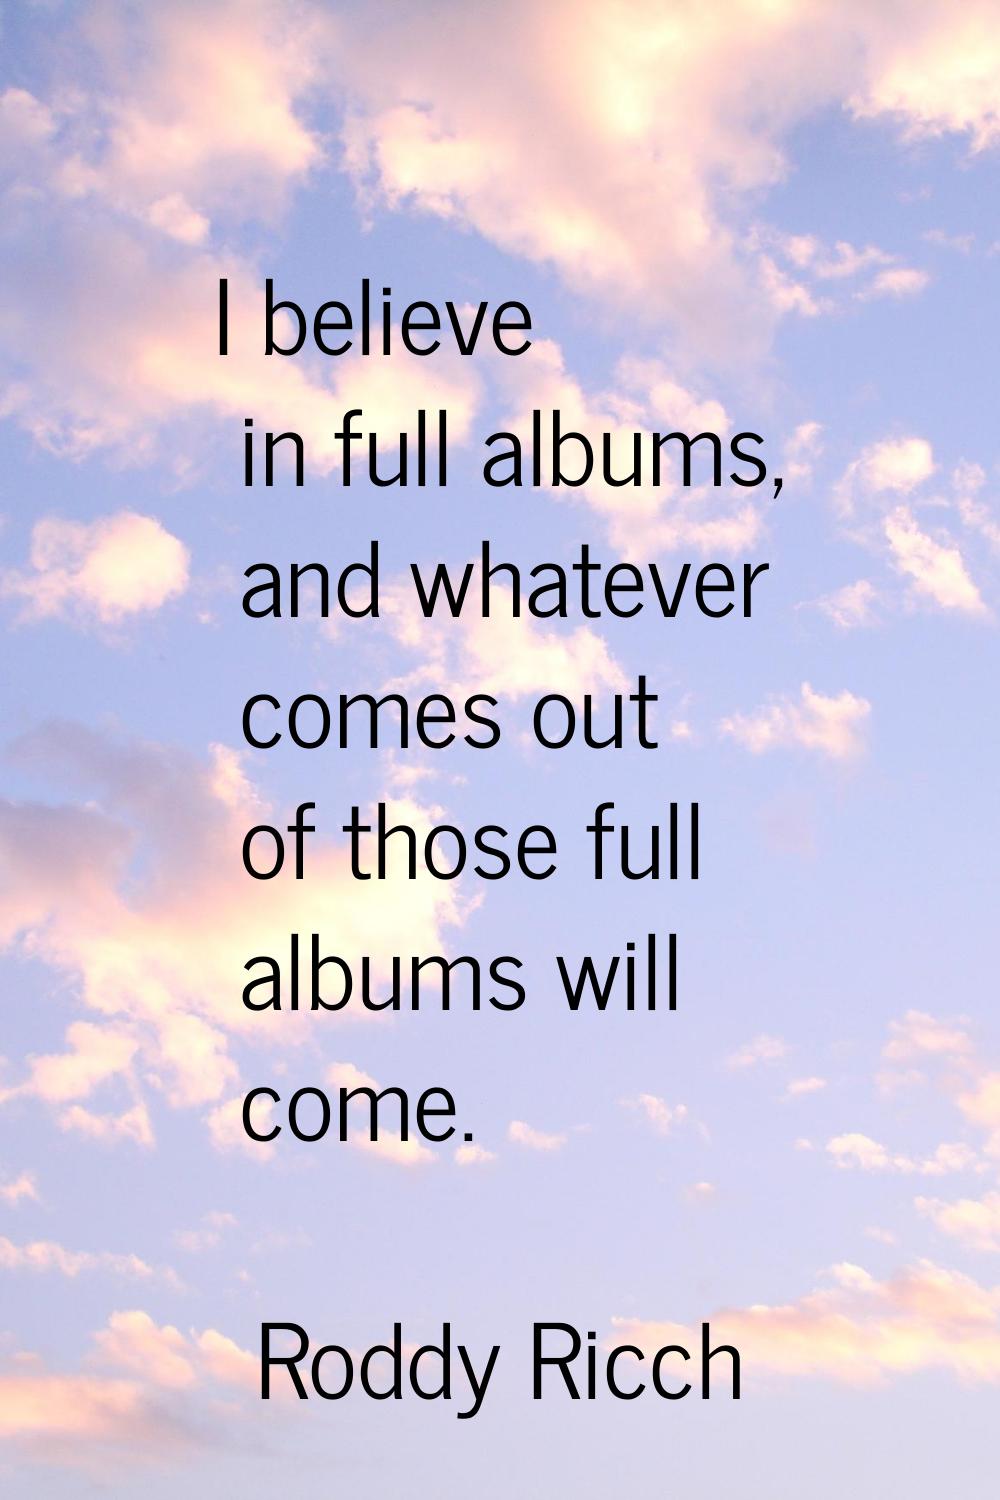 I believe in full albums, and whatever comes out of those full albums will come.